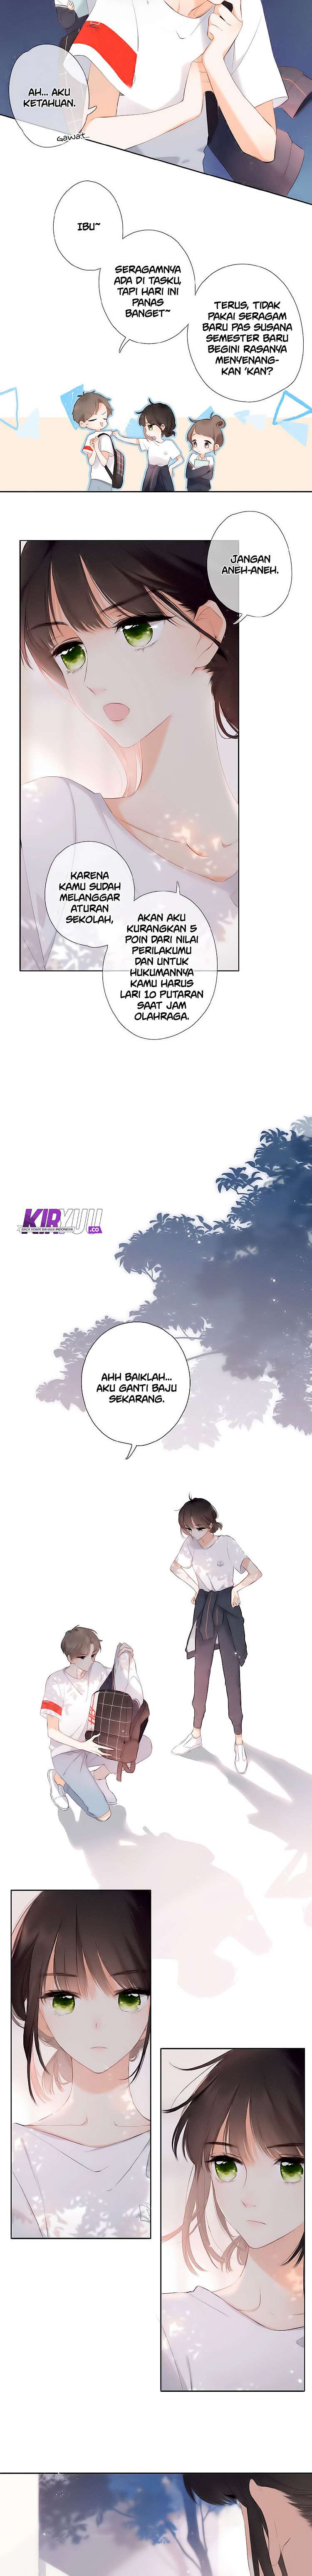 Once More Chapter 01.2 4